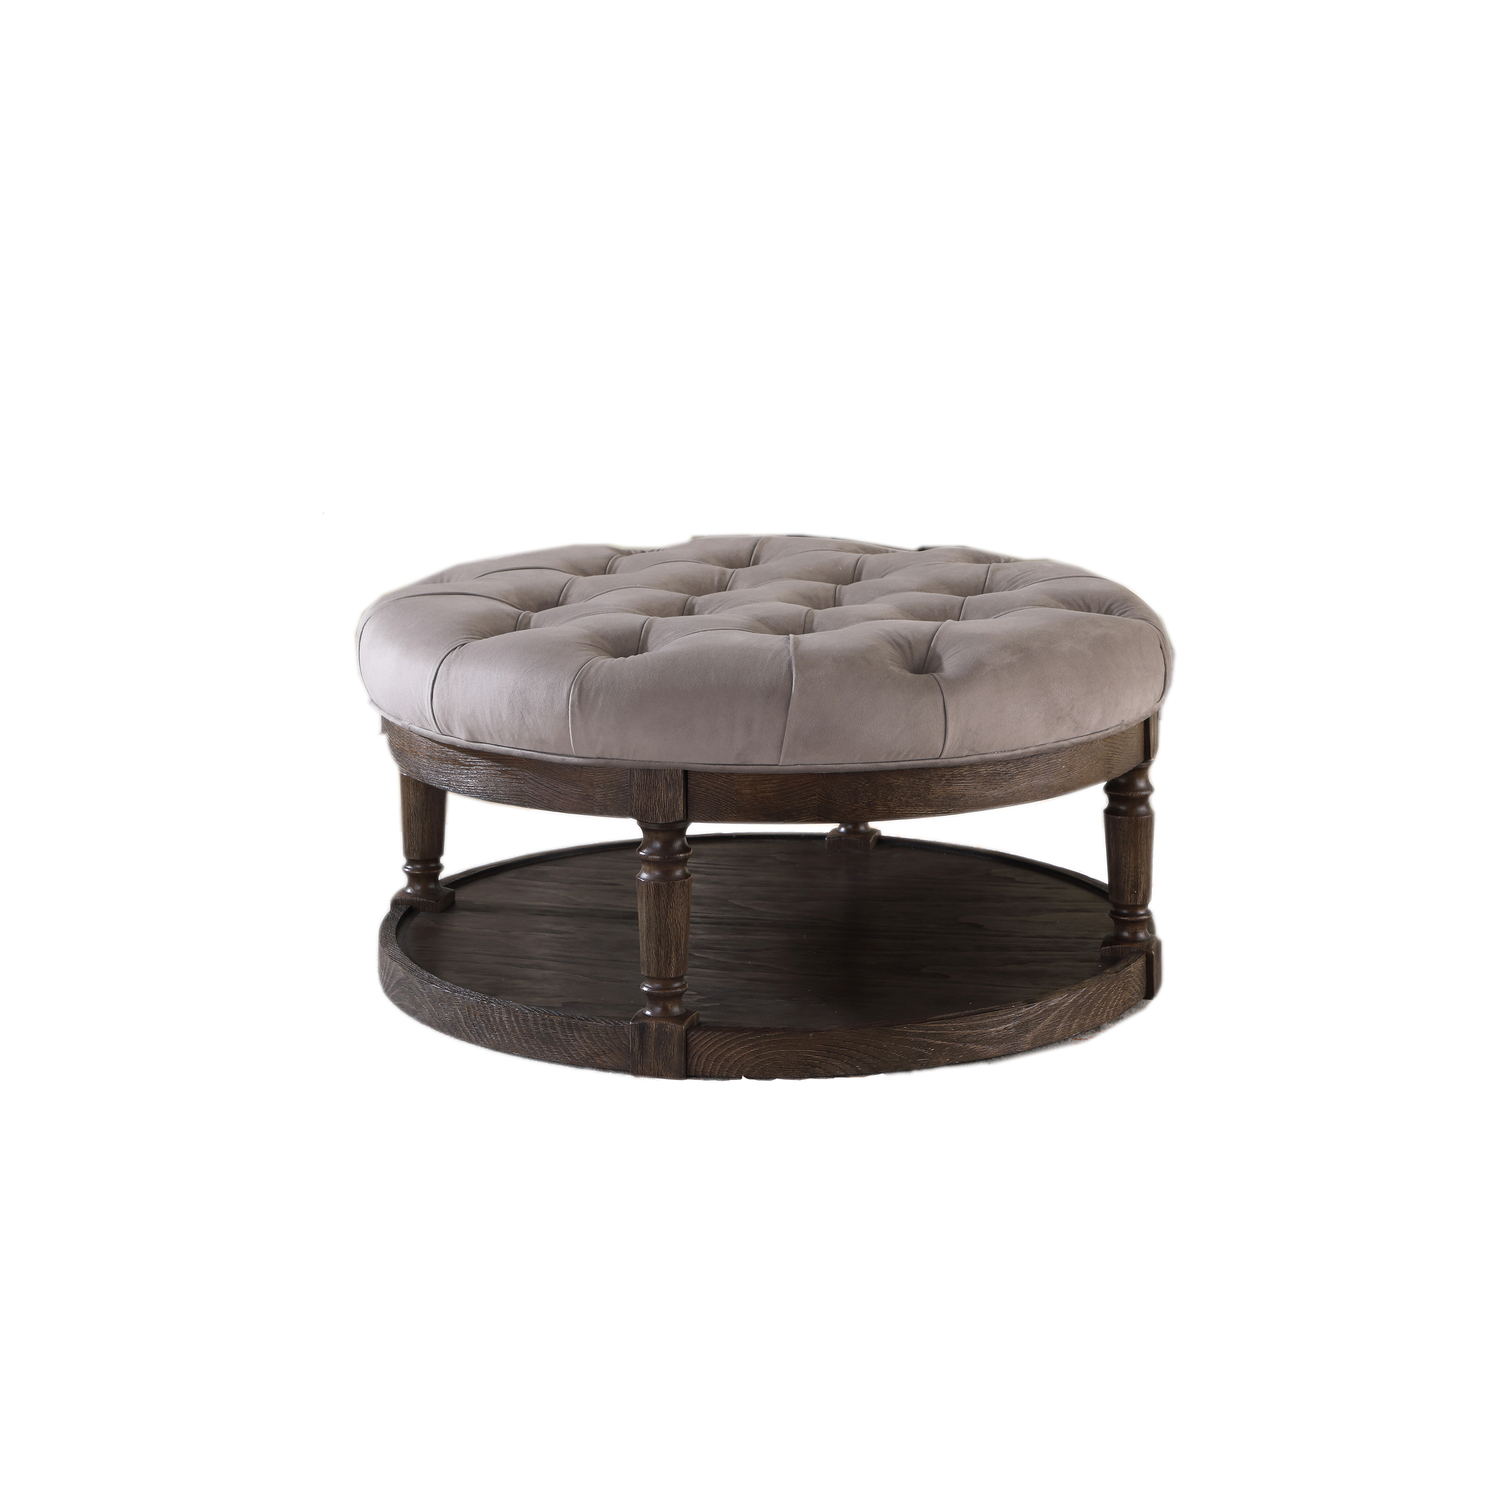 Best Master Linen Fabric Upholstered Round Ottoman in Otter/Smoked Rustic Gray - image 1 of 2